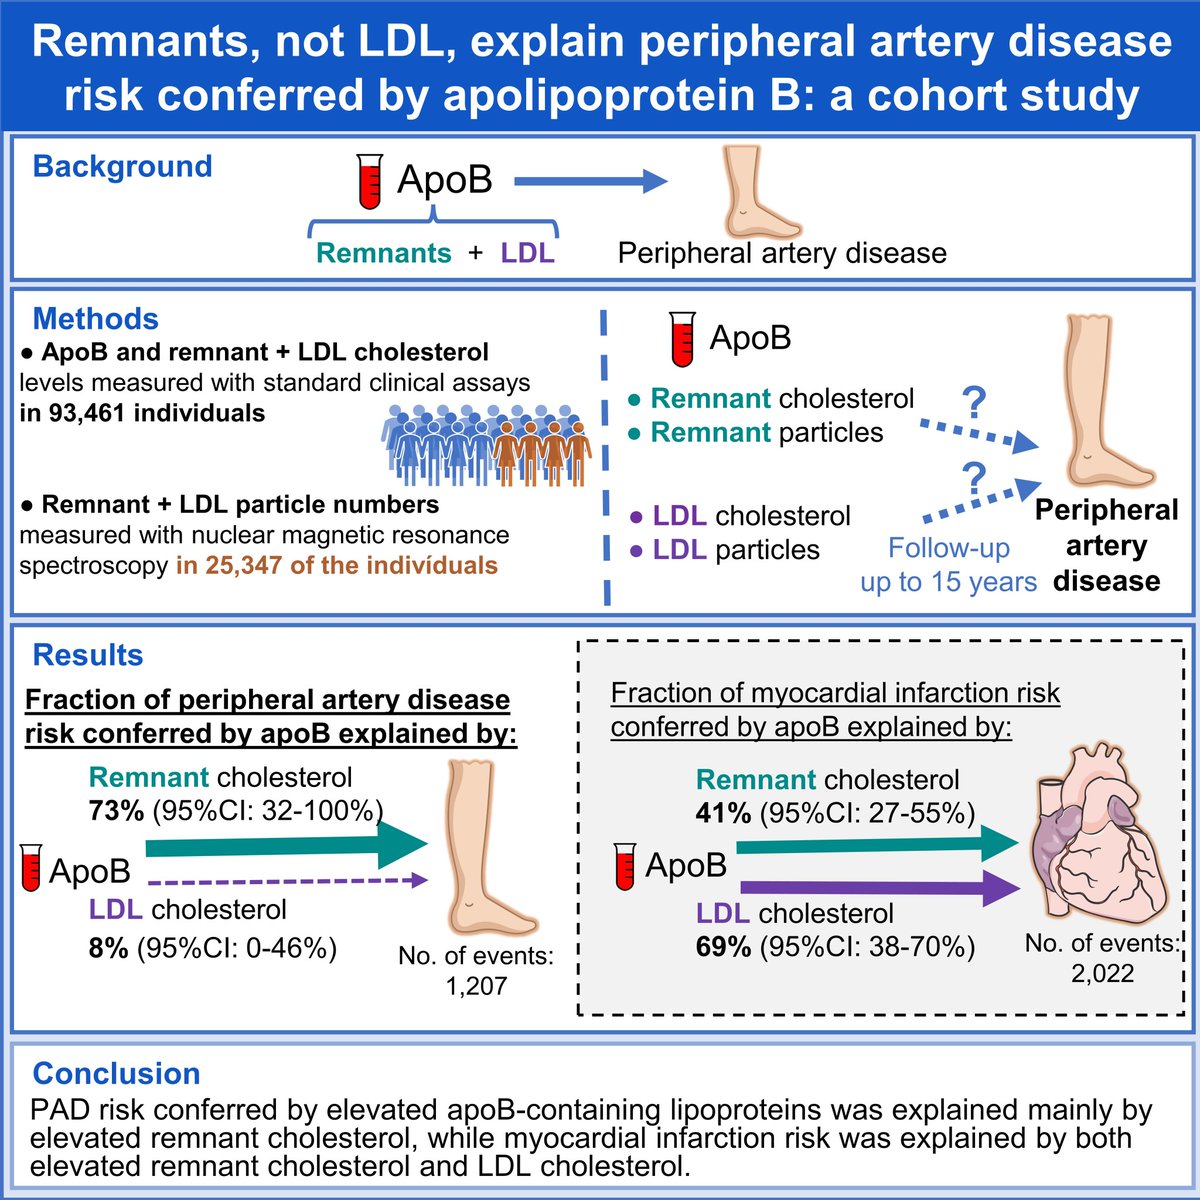 May Featured: Remnant cholesterol - more so than LDL cholesterol - is associated with peripheral artery disease: could this suggest a path to better lipid-based prevention and treatment of this common disease? ahajrnls.org/49b7kzu